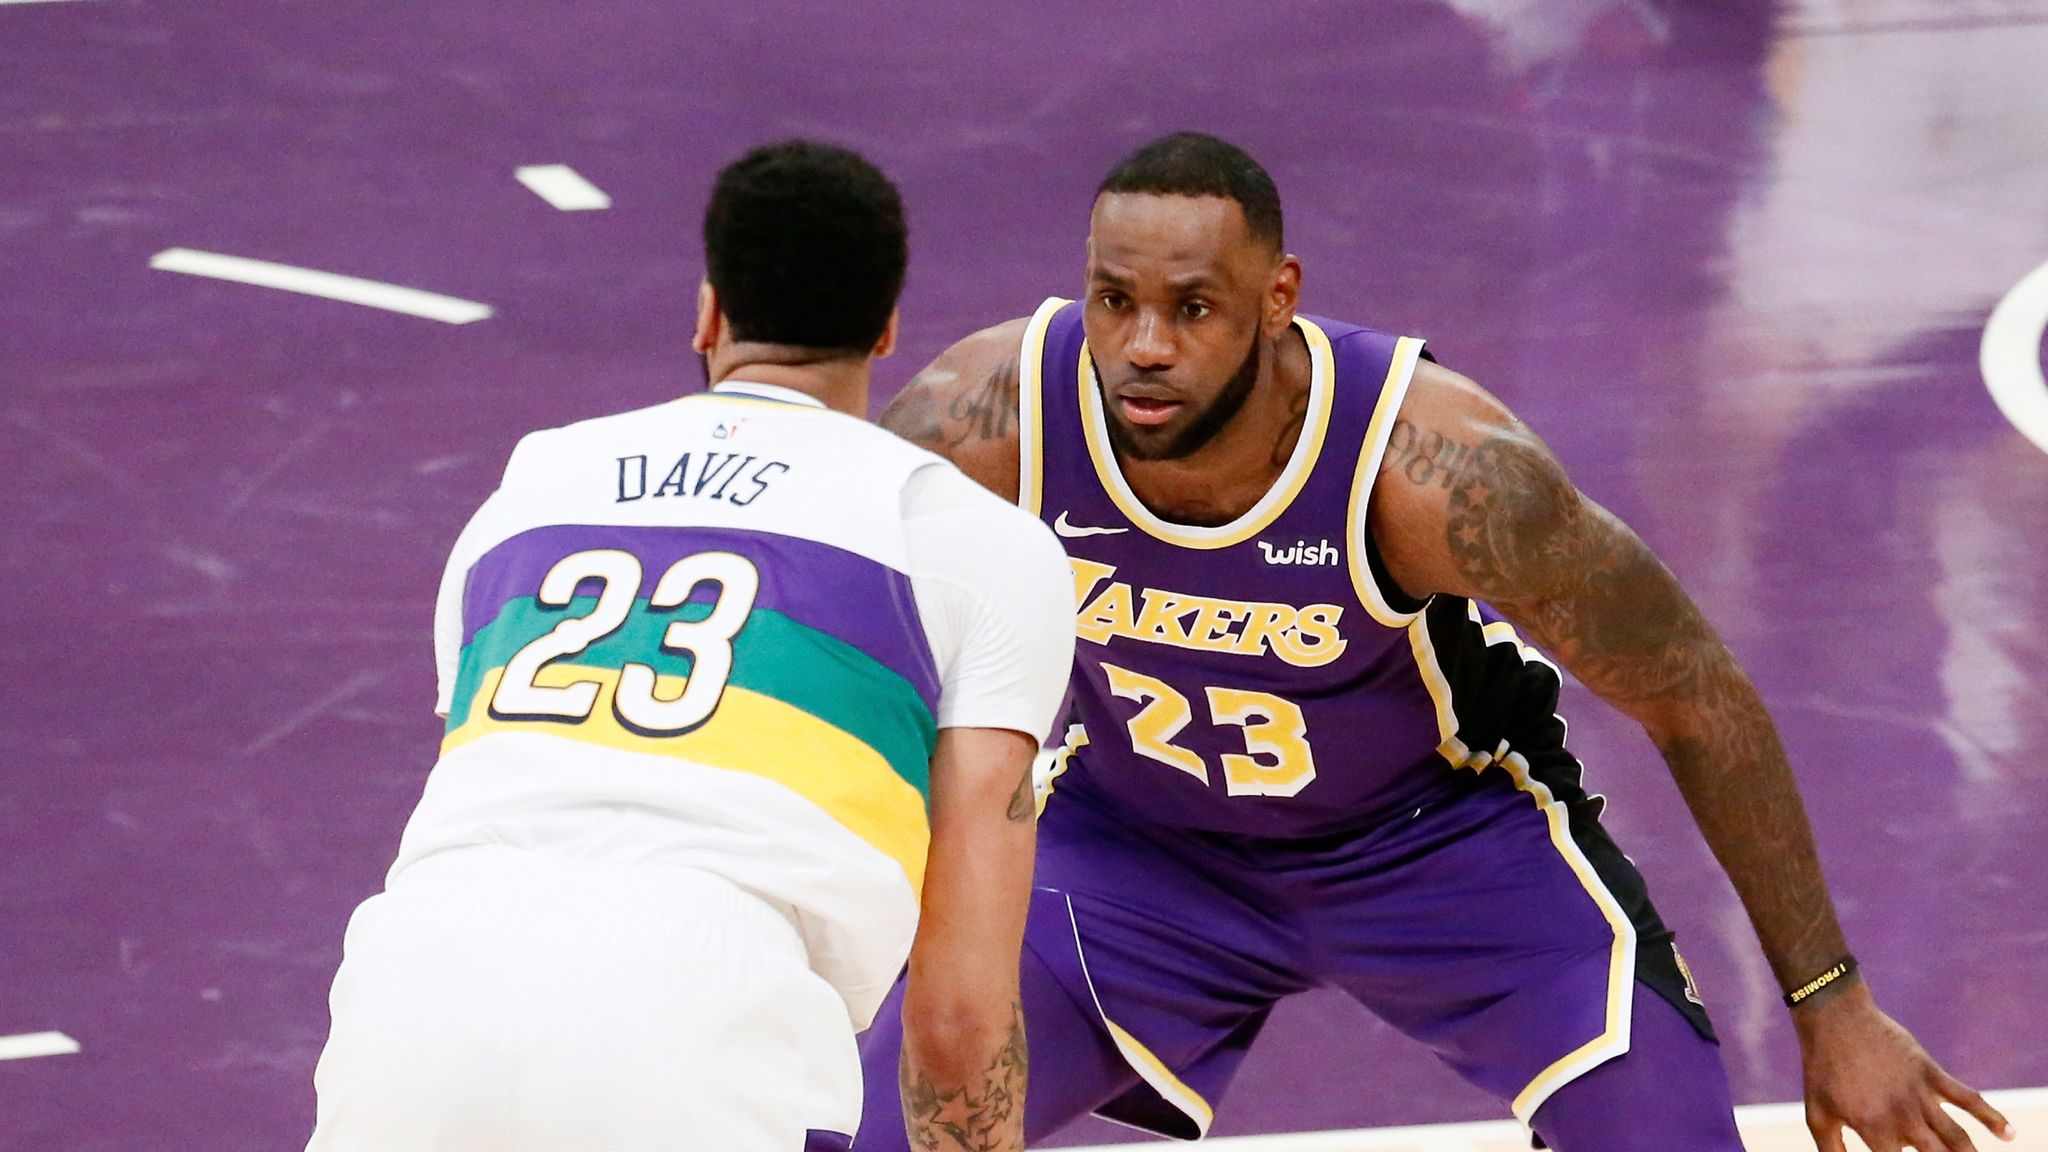 LeBron James to give Anthony Davis Los Angeles Lakers No 23 jersey